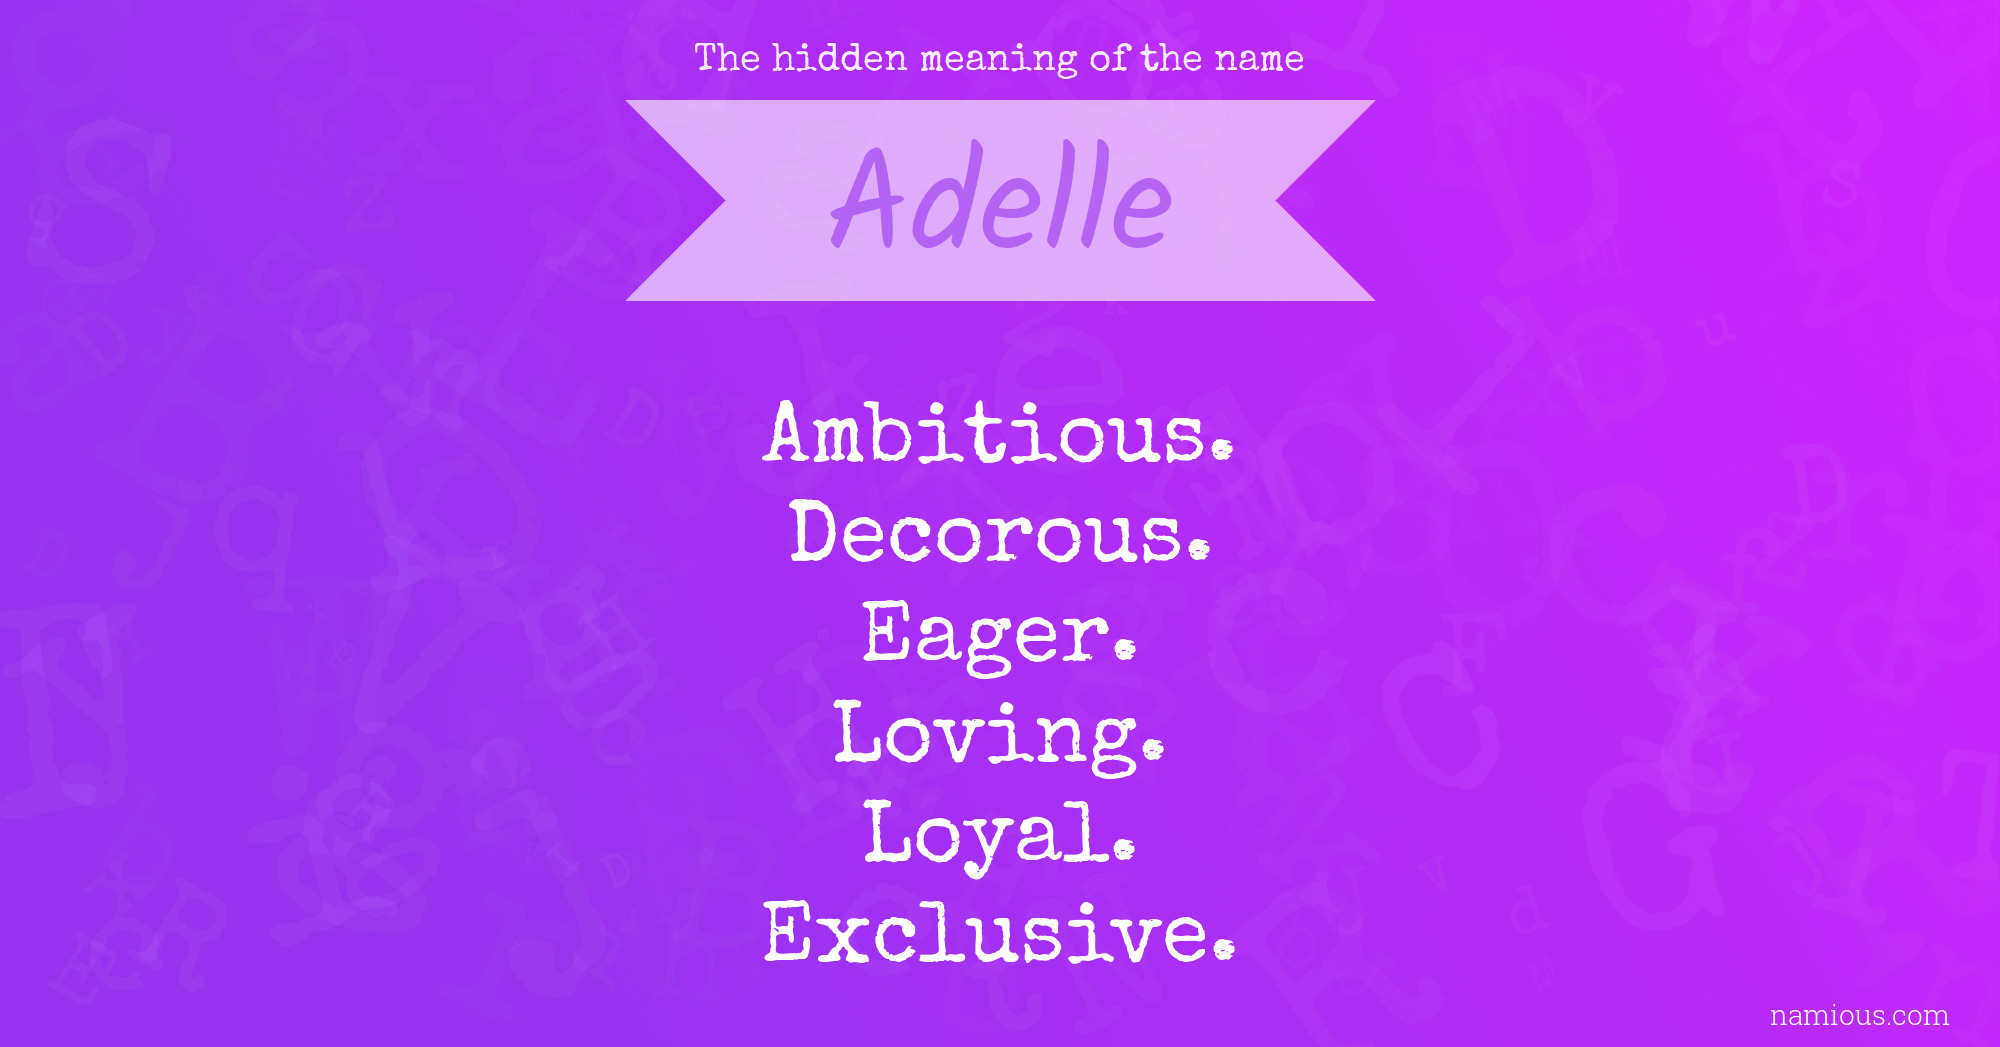 The hidden meaning of the name Adelle